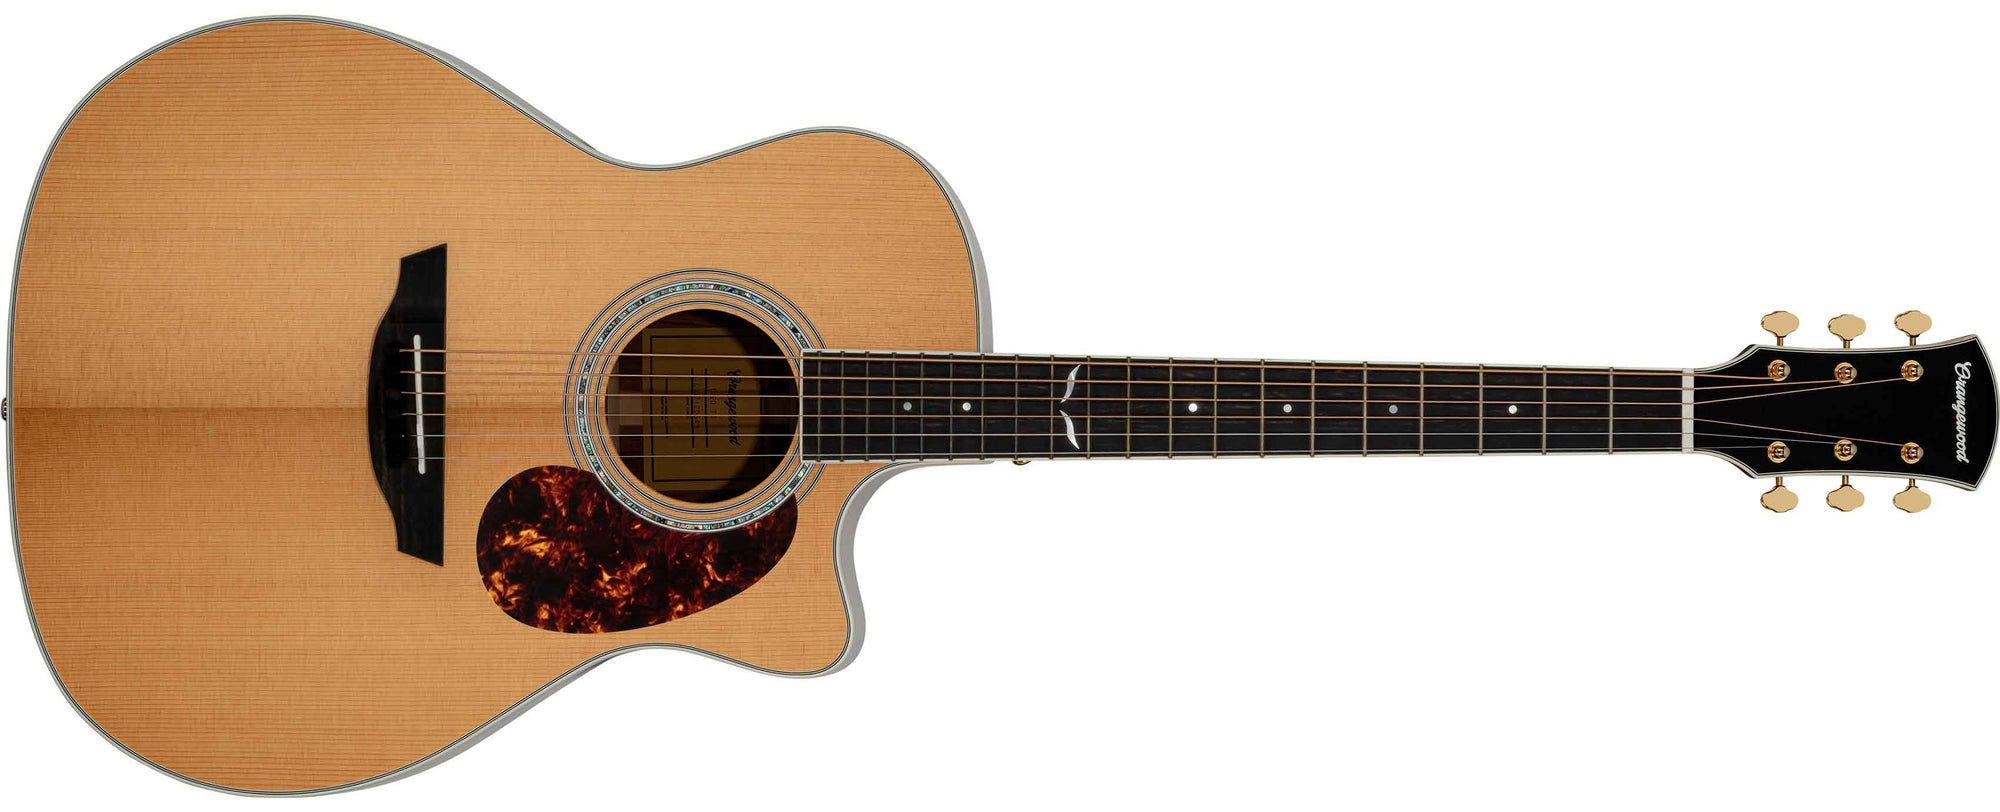 Torrefied spruce grand auditorium cutaway acoustic guitar with ebony fretboard, mother of pearl fretboard inlays, abalone rosette, and gold hardware